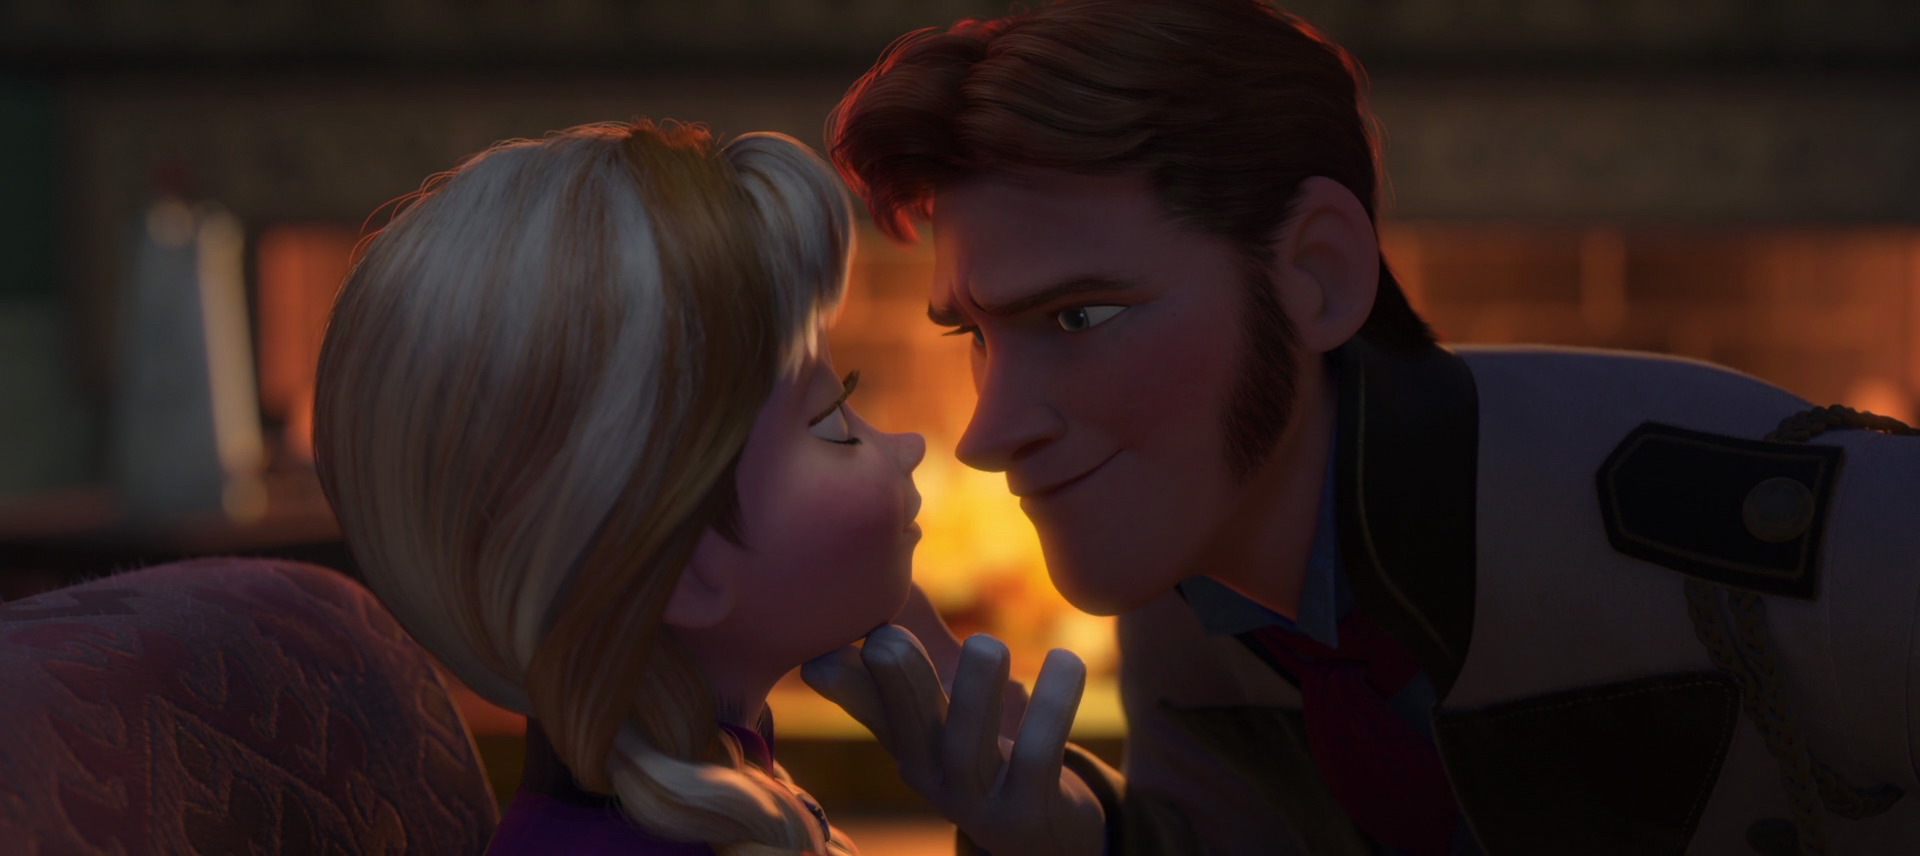 Will Frozen 3 bring back Prince Hans as the main antagonist?